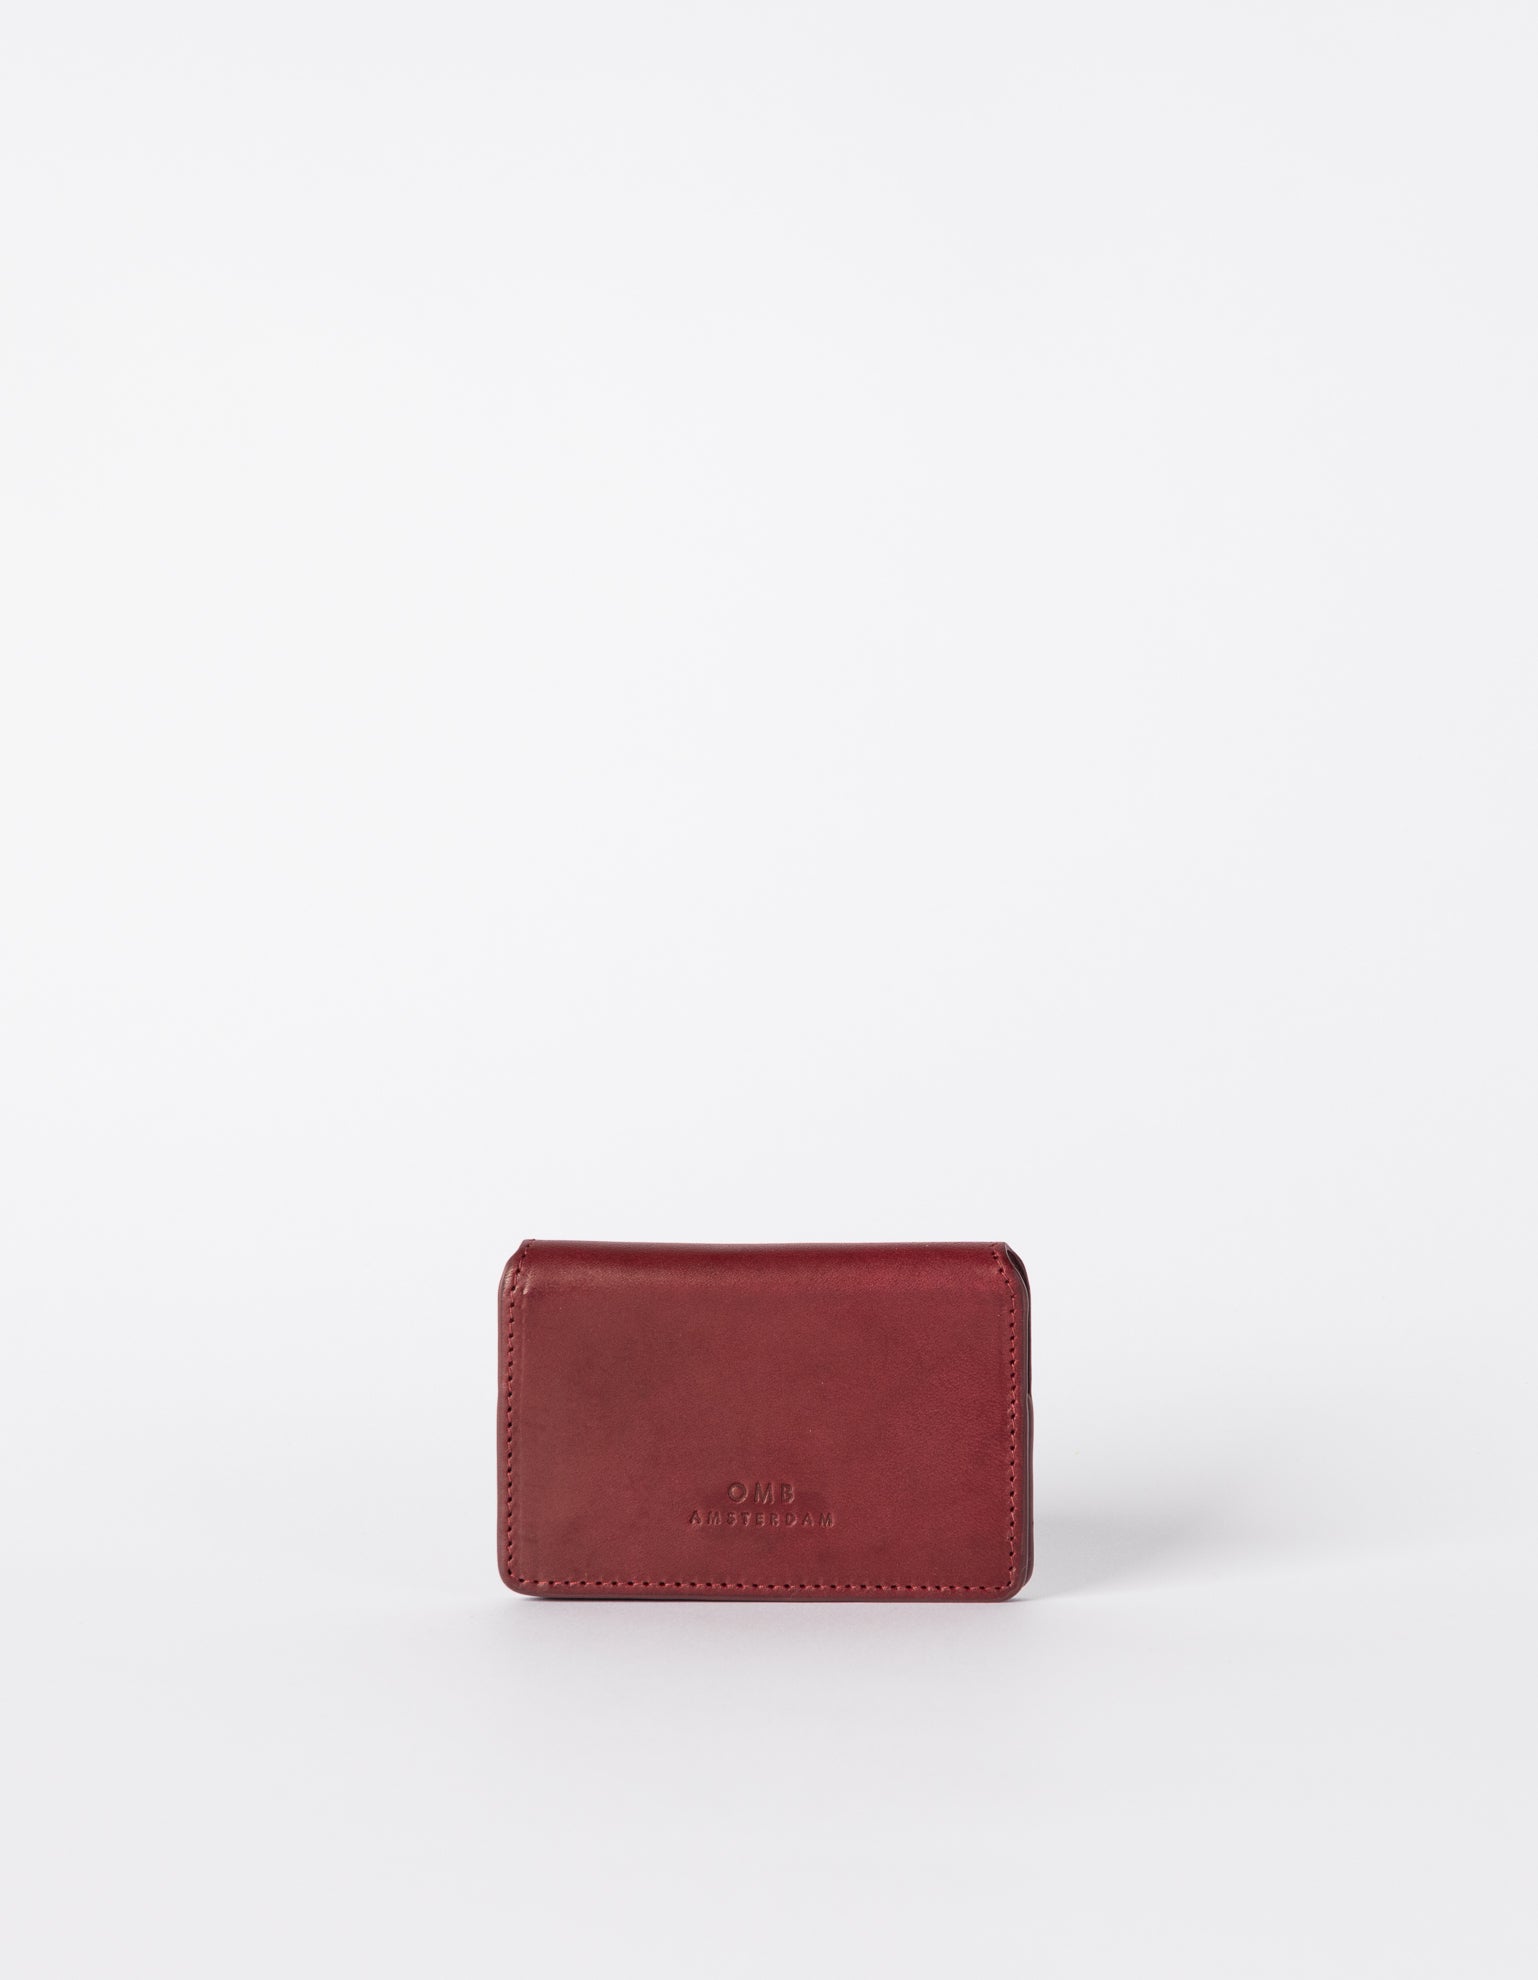 Small Ruby card case. Square shape. Front image